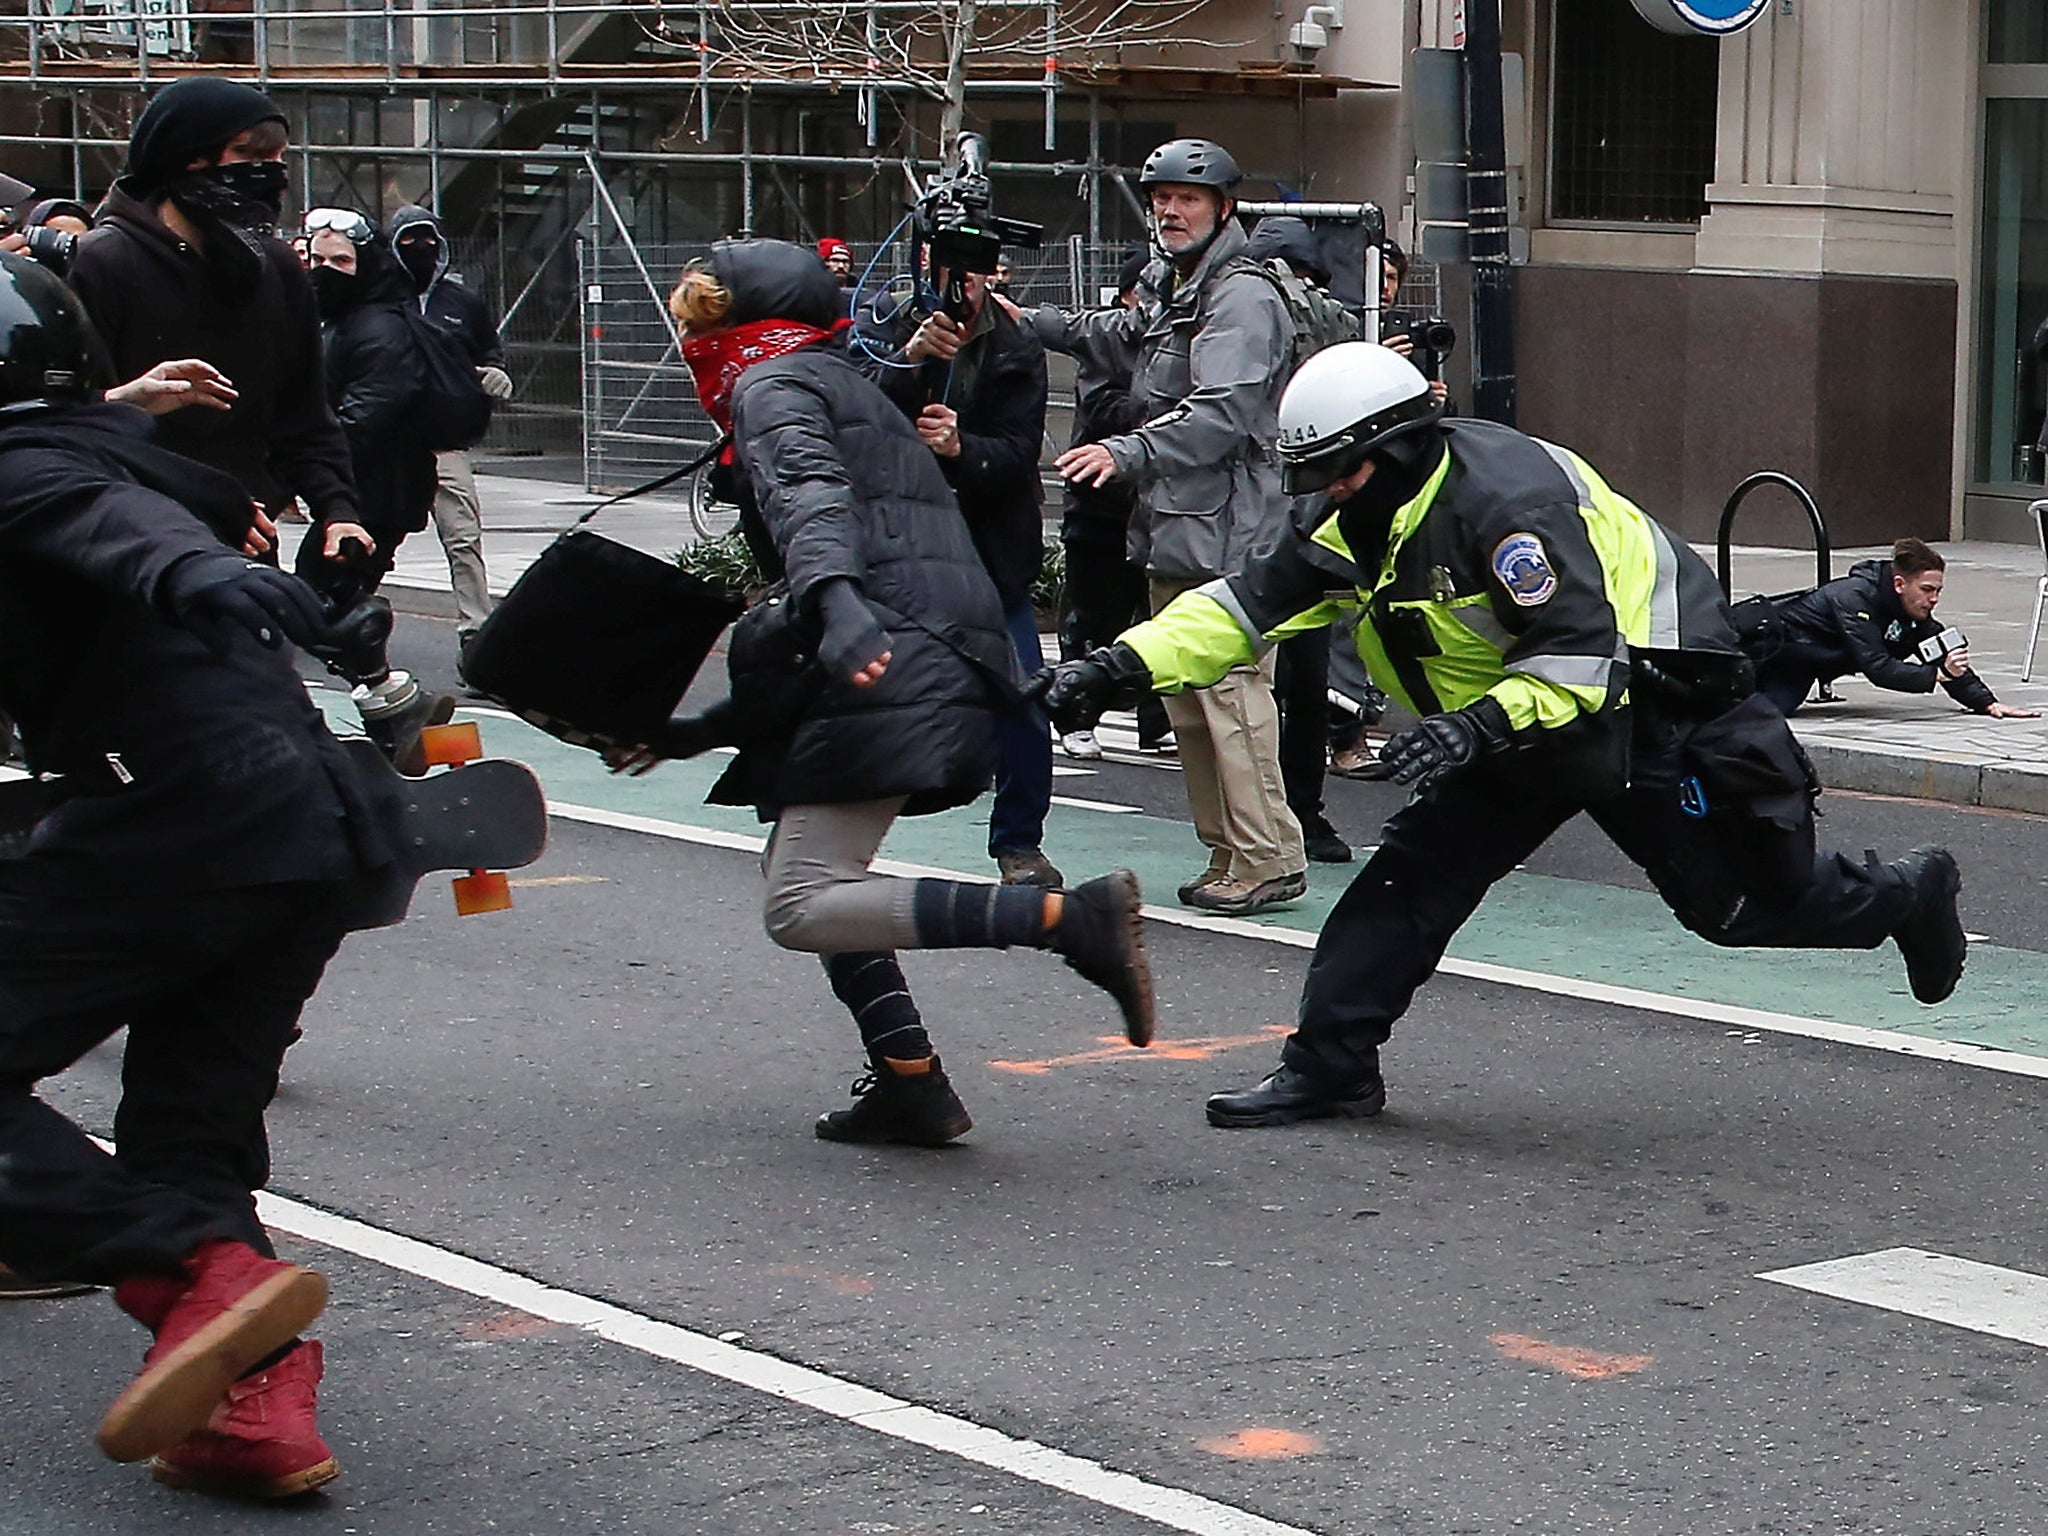 Alex Rubinstein can be seen falling to the pavement in the background to the right of shot Reuters